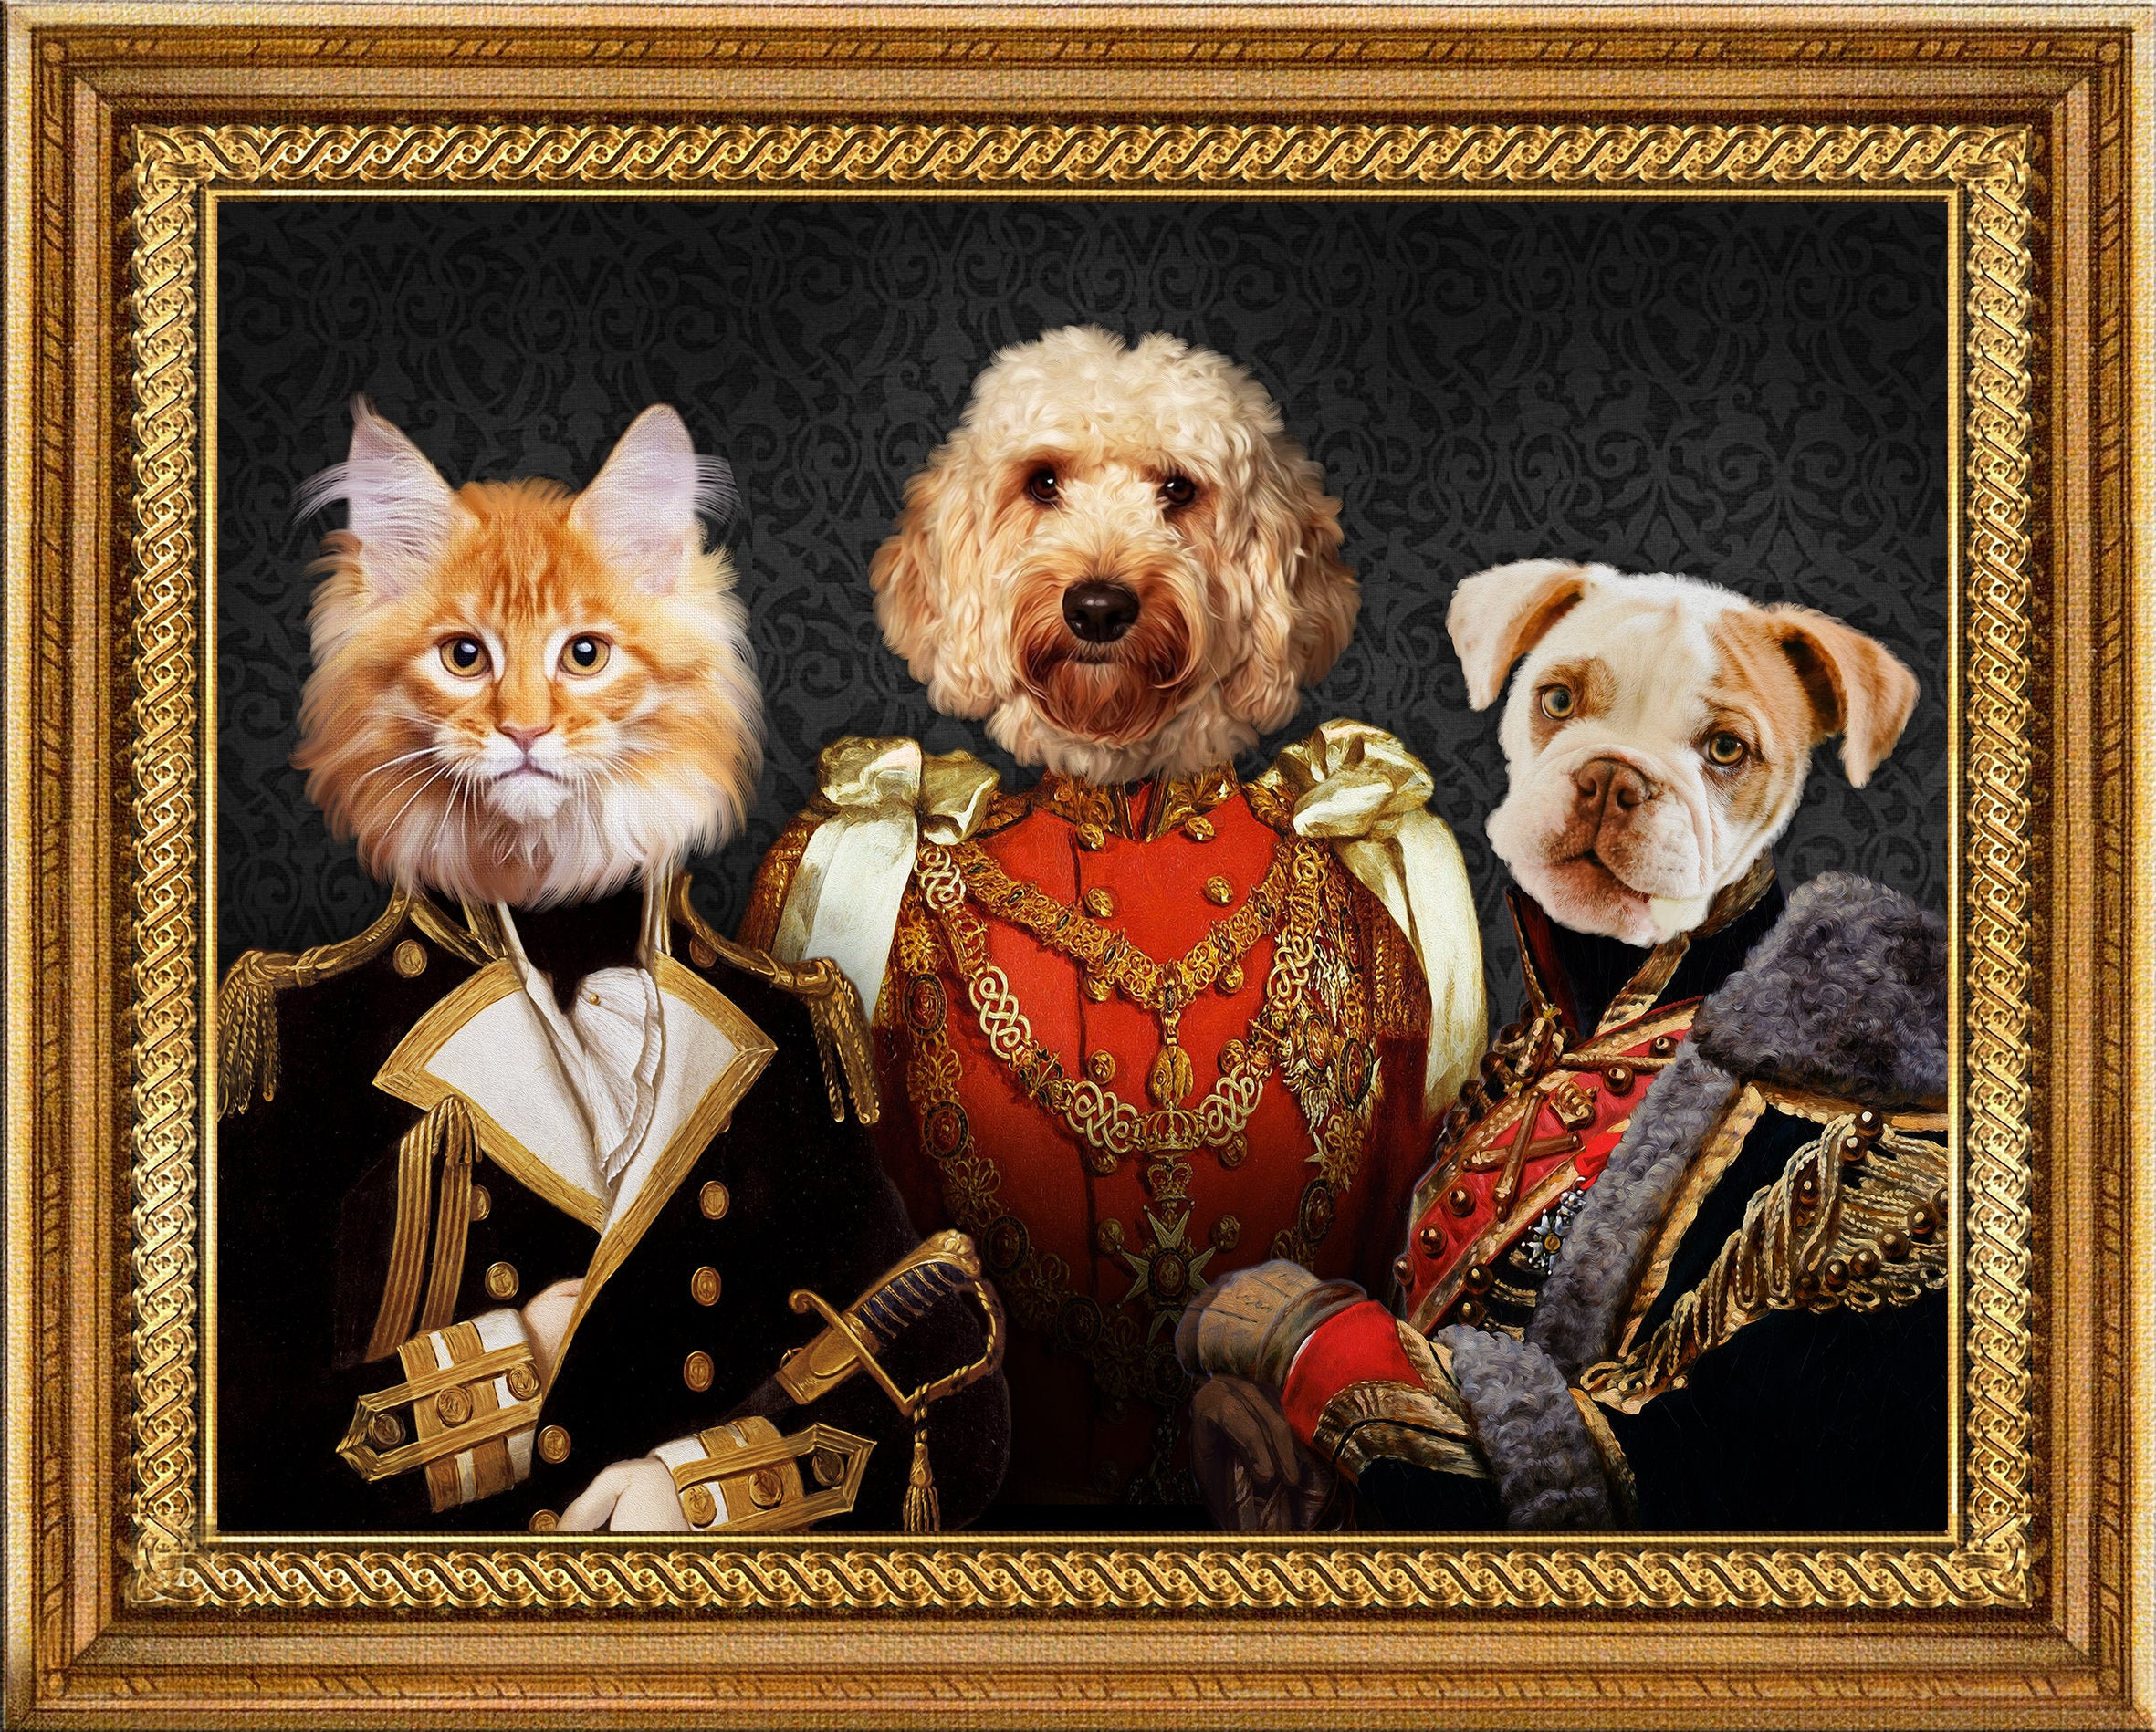 Miicreative- The Perfect Partner To Be The Pet Portrait Artist